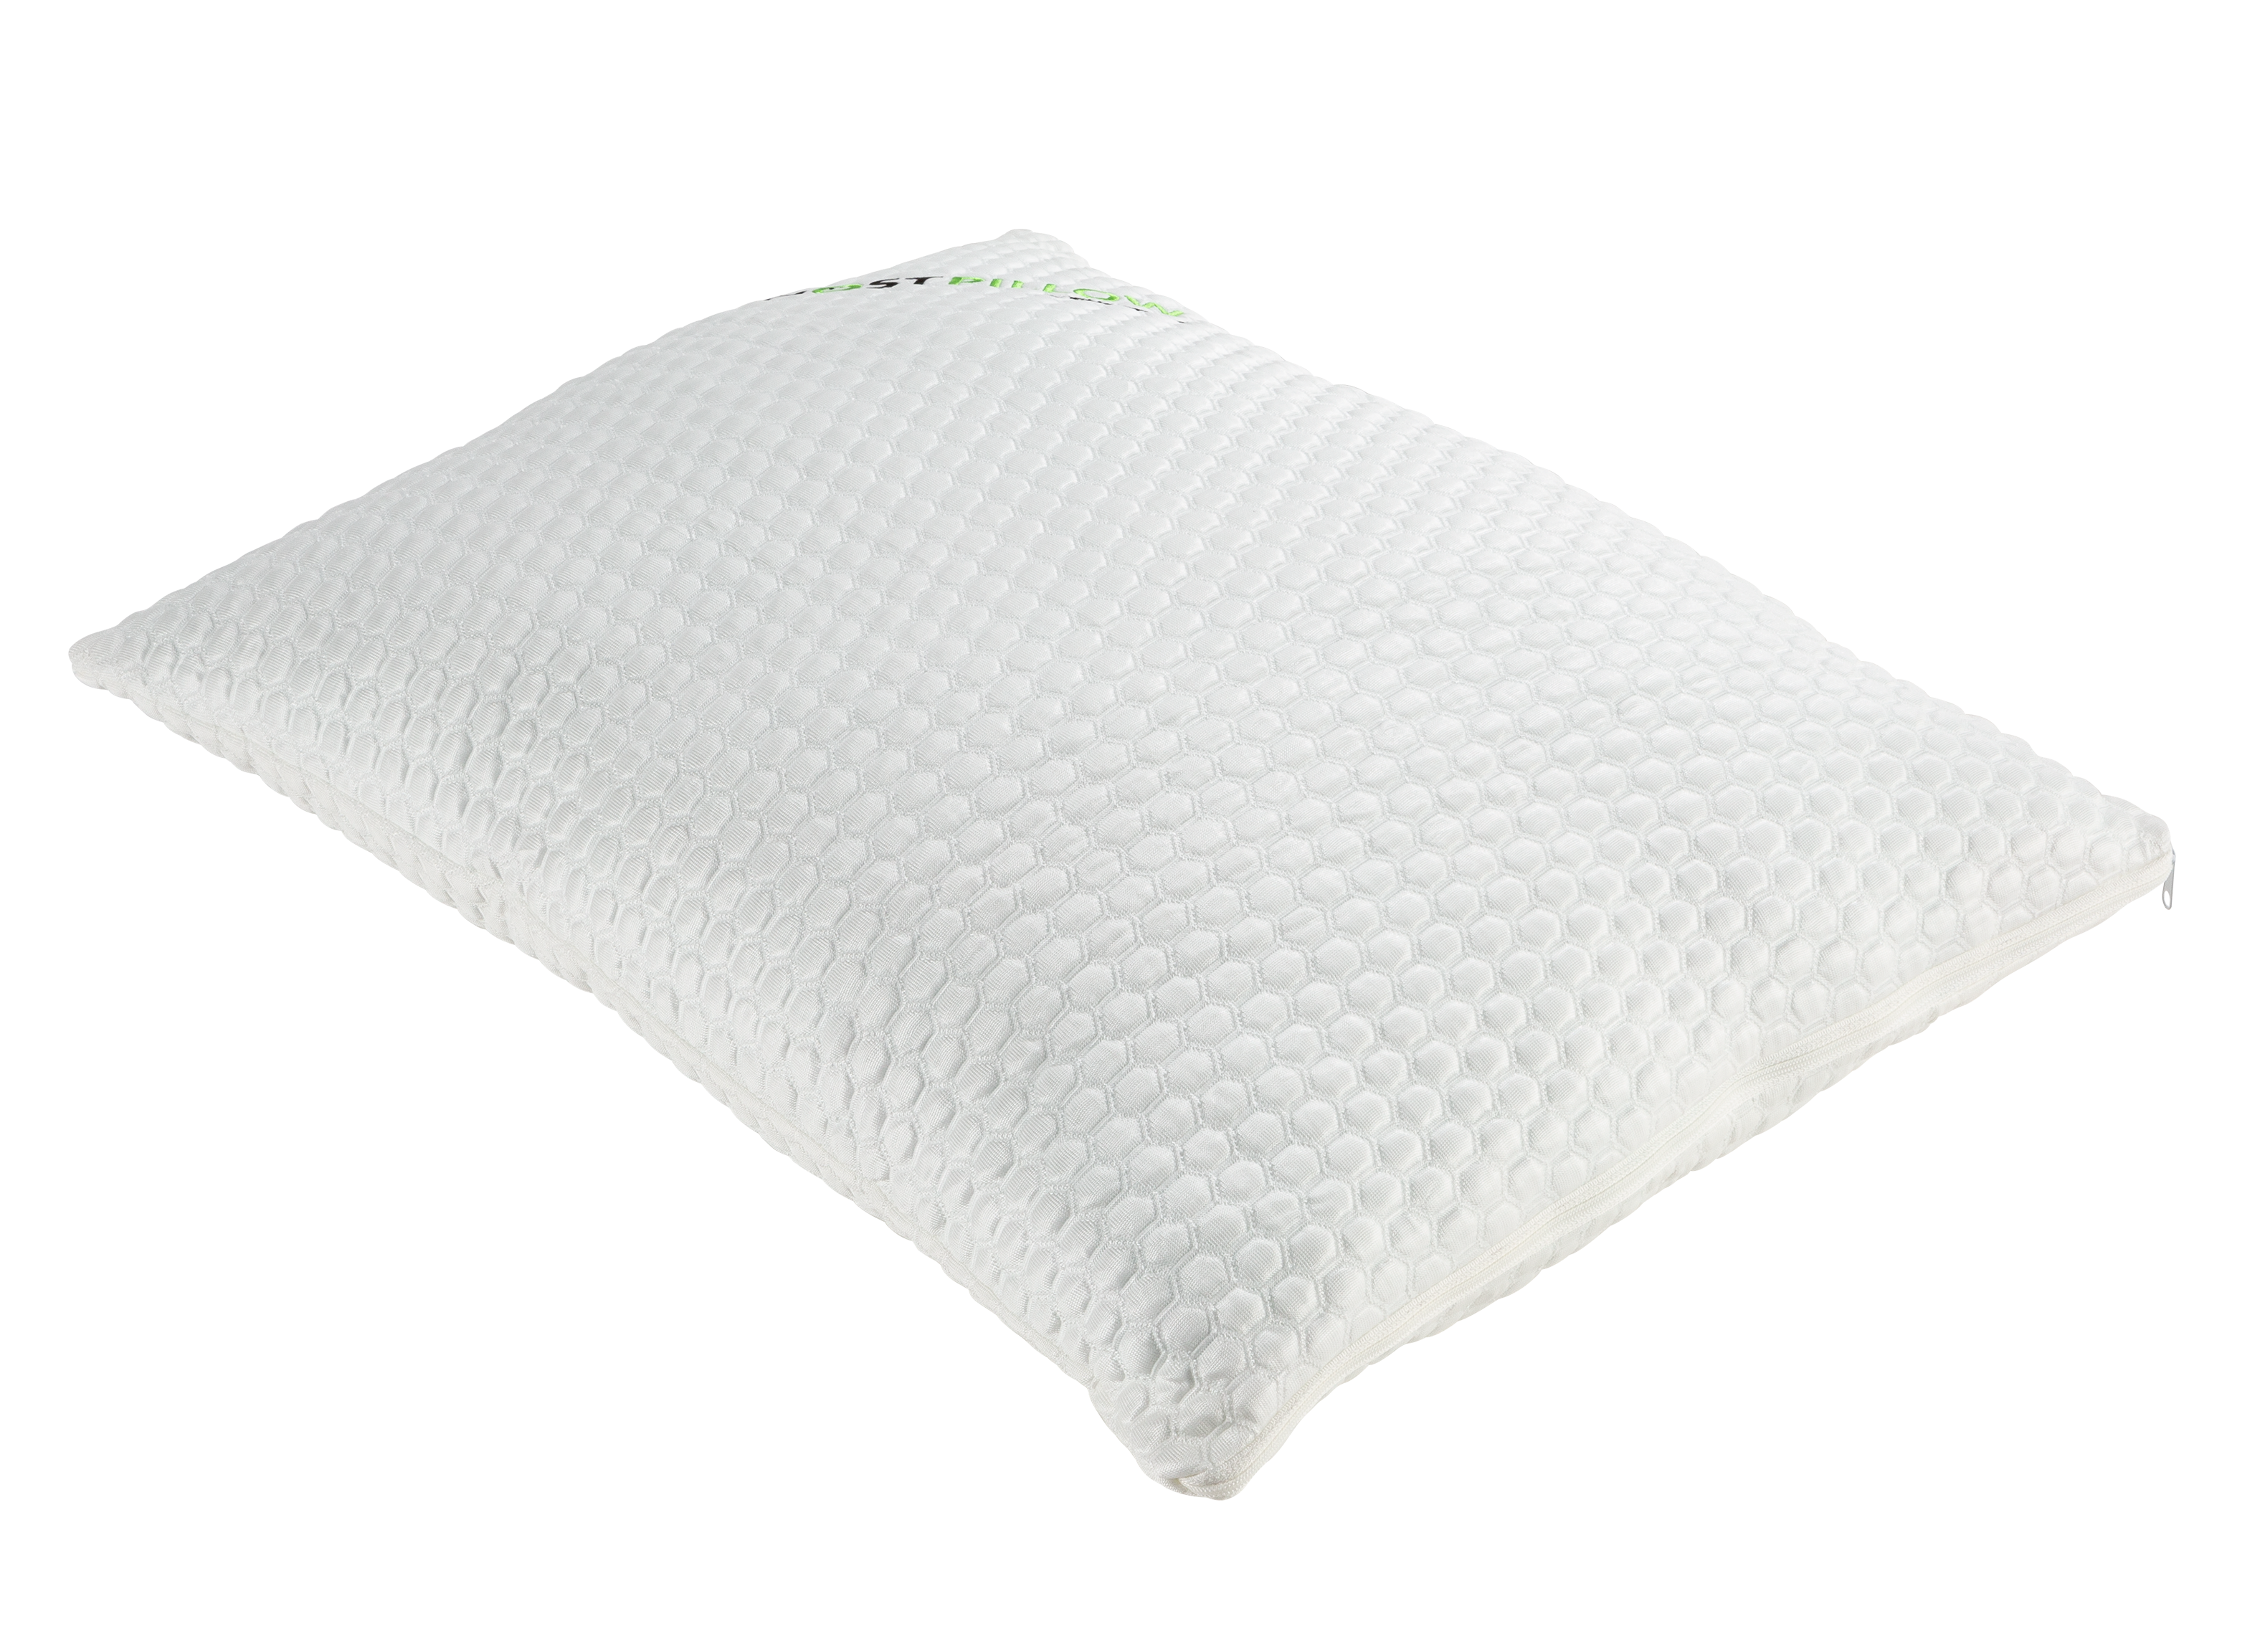 GhostBed Shredded (2pk) Pillow Review - Consumer Reports